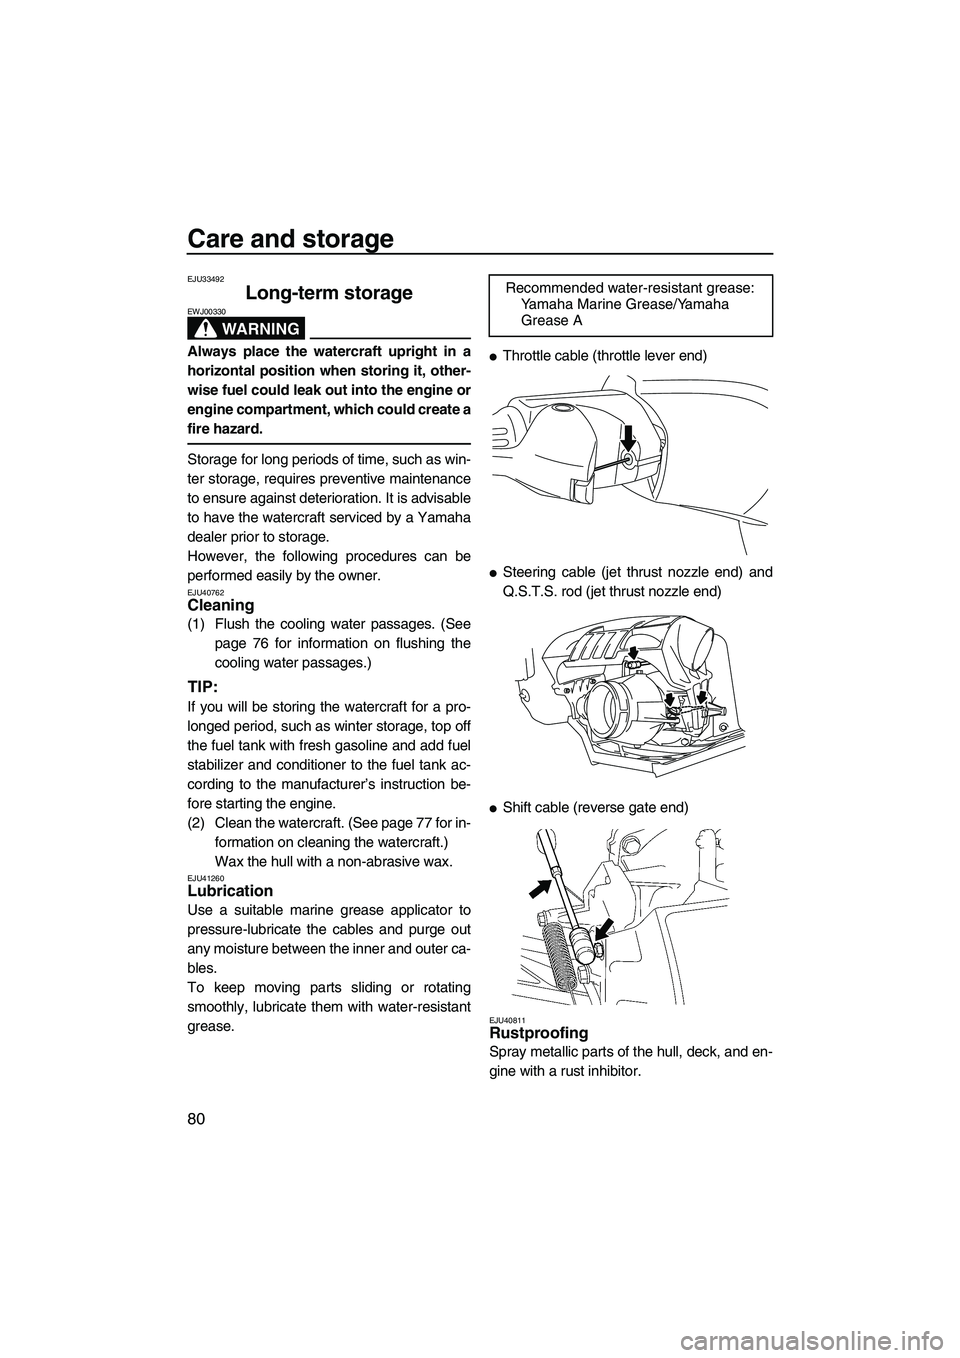 YAMAHA FZR 2013  Owners Manual Care and storage
80
EJU33492
Long-term storage 
WARNING
EWJ00330
Always place the watercraft upright in a
horizontal position when storing it, other-
wise fuel could leak out into the engine or
engine